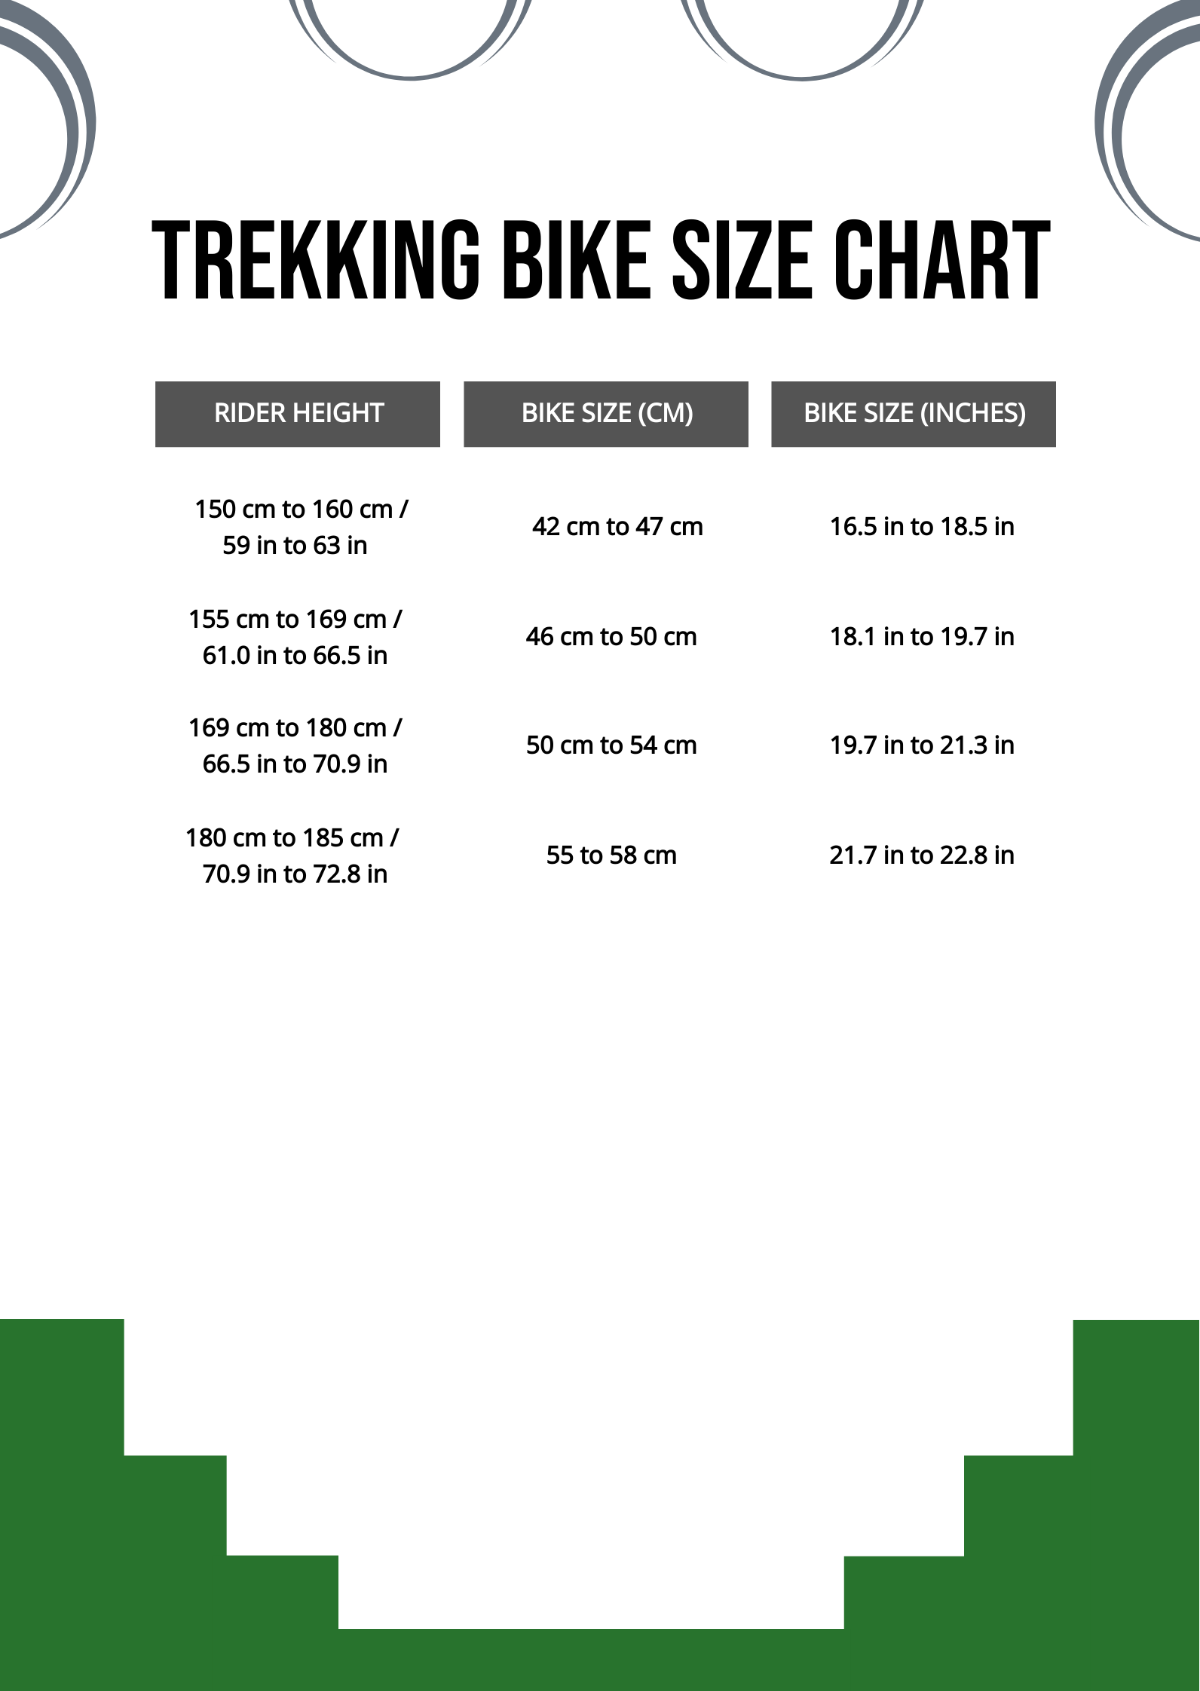 Trek Bike Size Chart Template Edit Online And Download Example